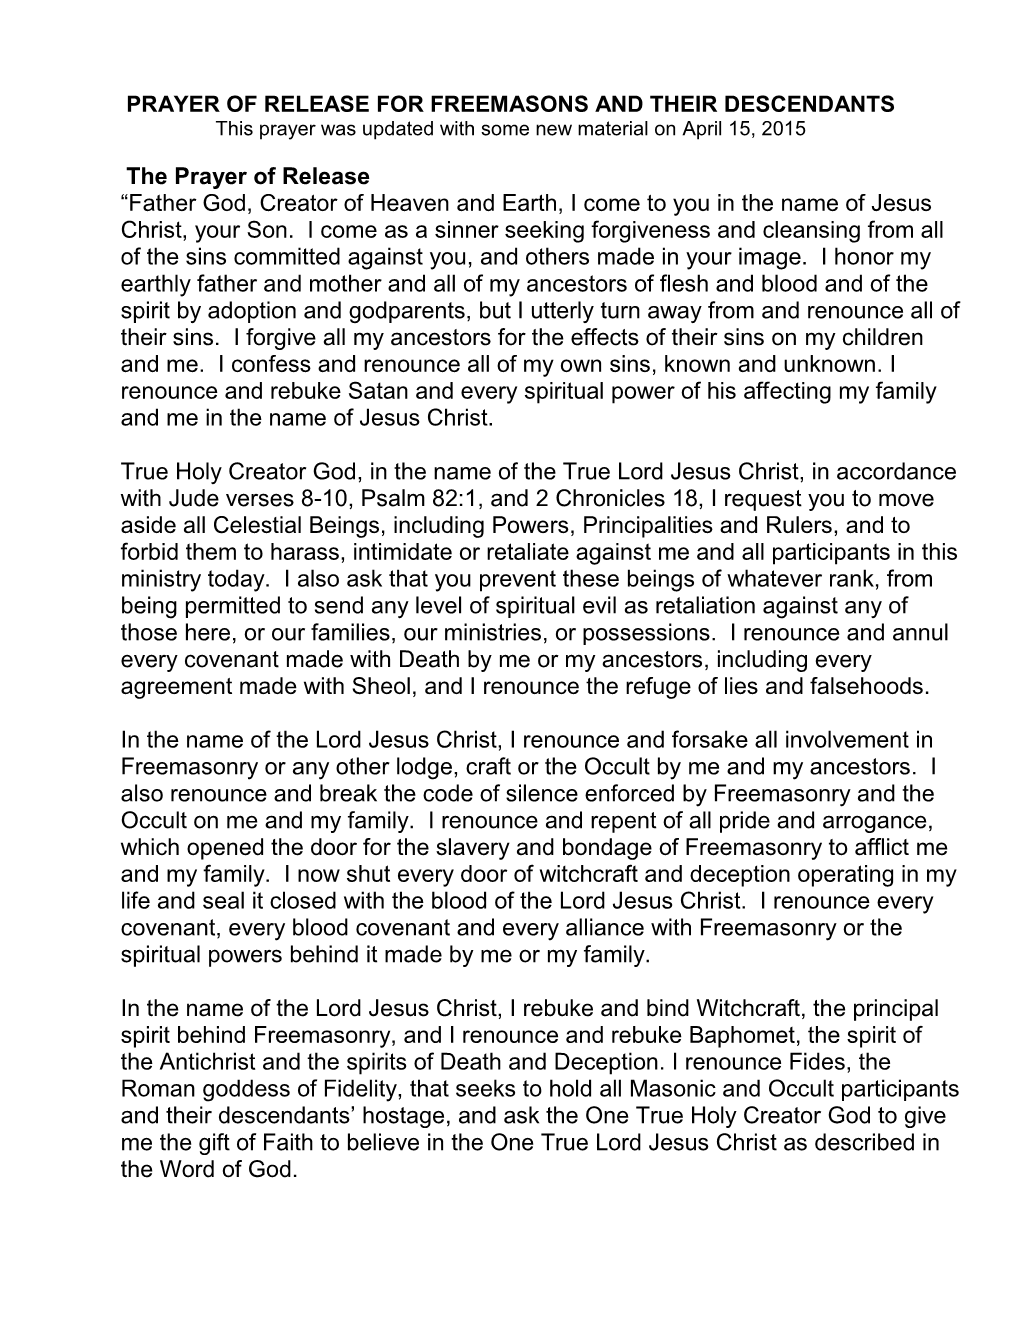 PRAYER of RELEASE for FREEMASONS and THEIR DESCENDANTS This Prayer Was Updated with Some New Material on April 15, 2015